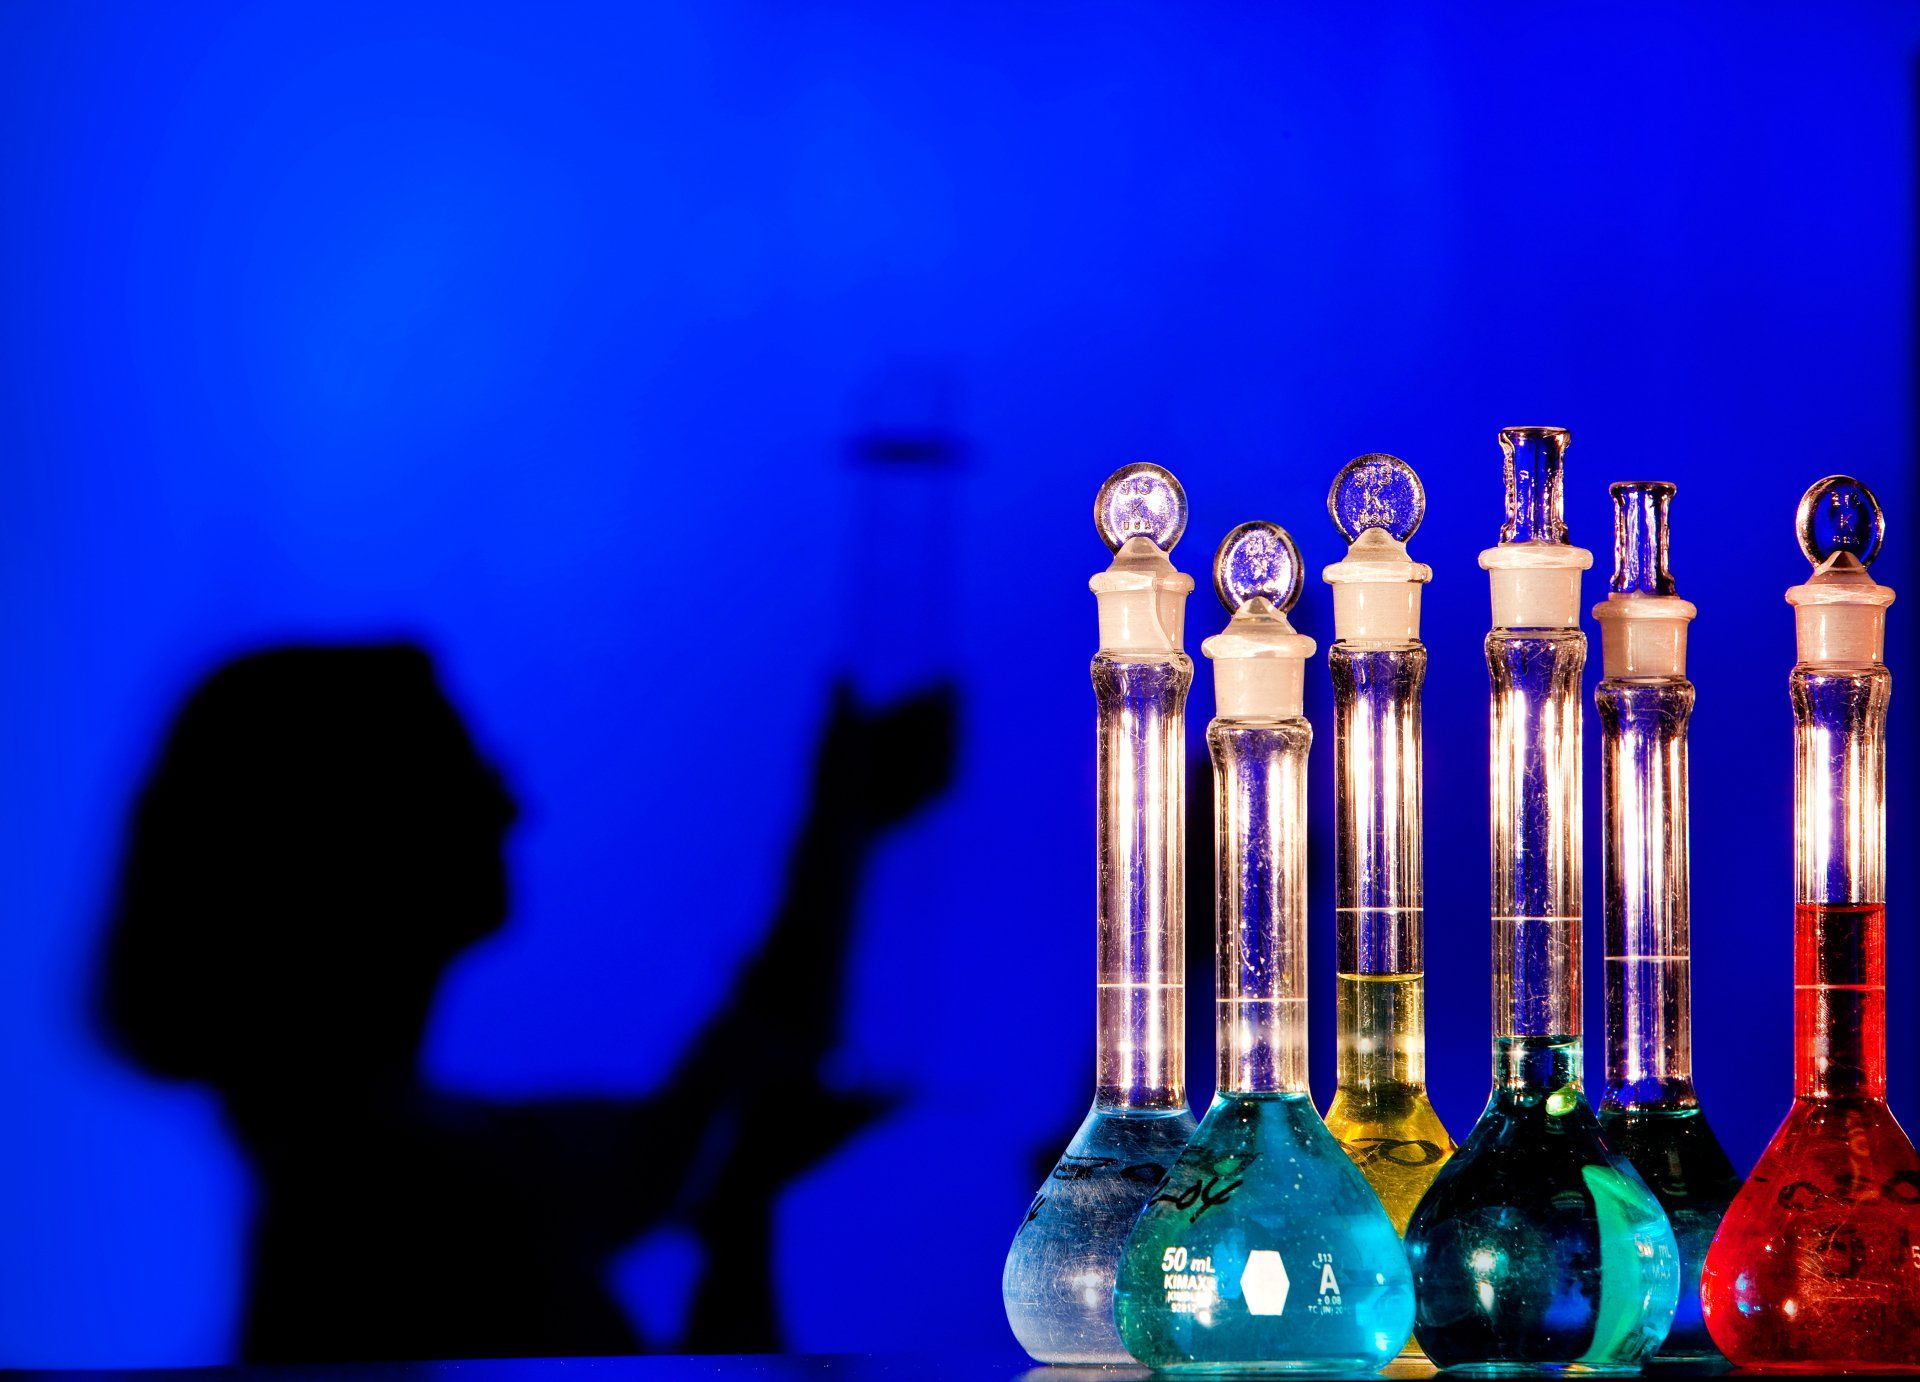 A woman laboratory scientist is silhouetted behind vibrant vials of liquids in her research lab.